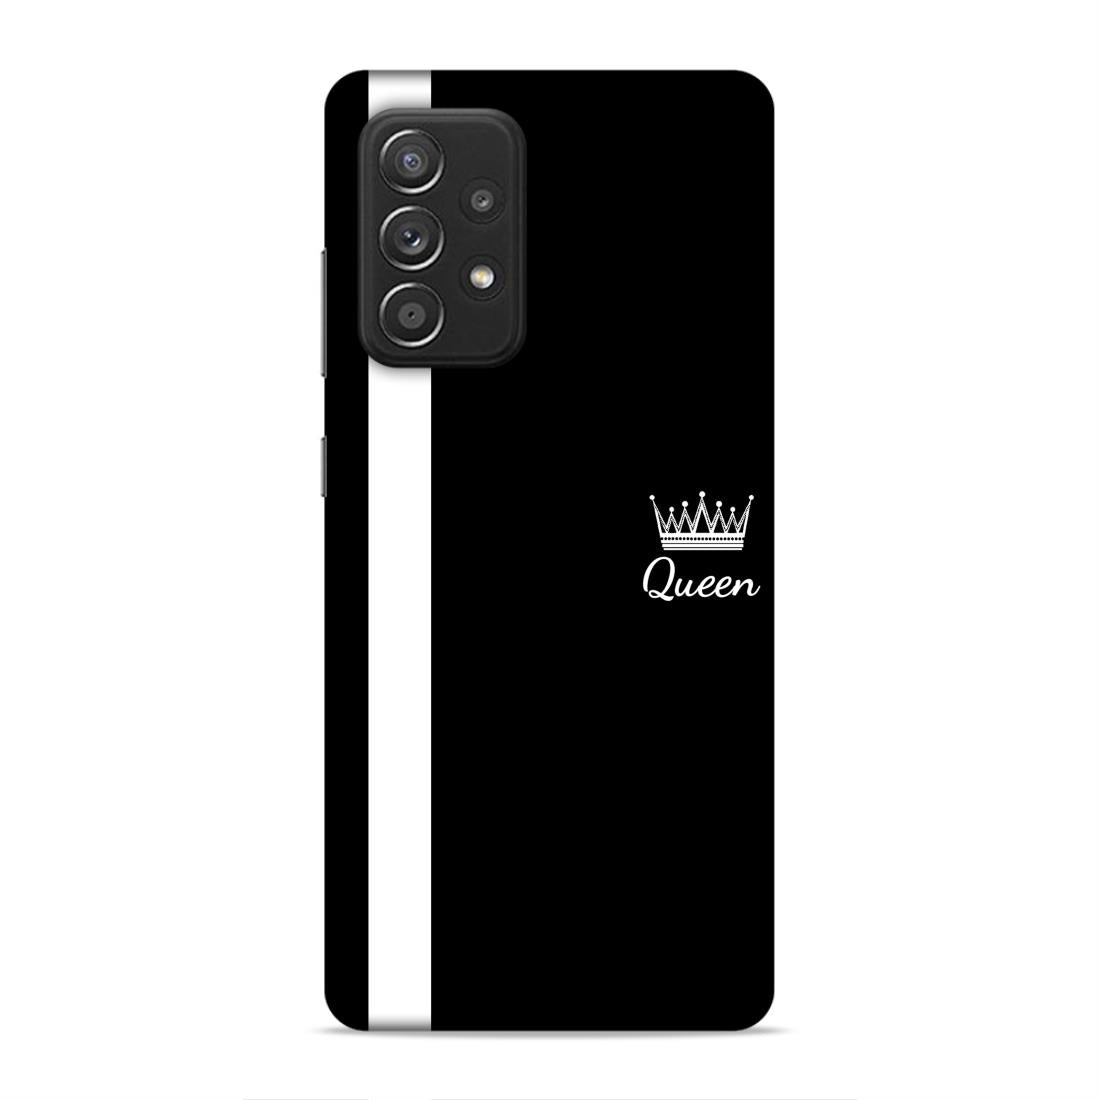 Queen Hard Back Case For Samsung Galaxy A52 / A52s 5G